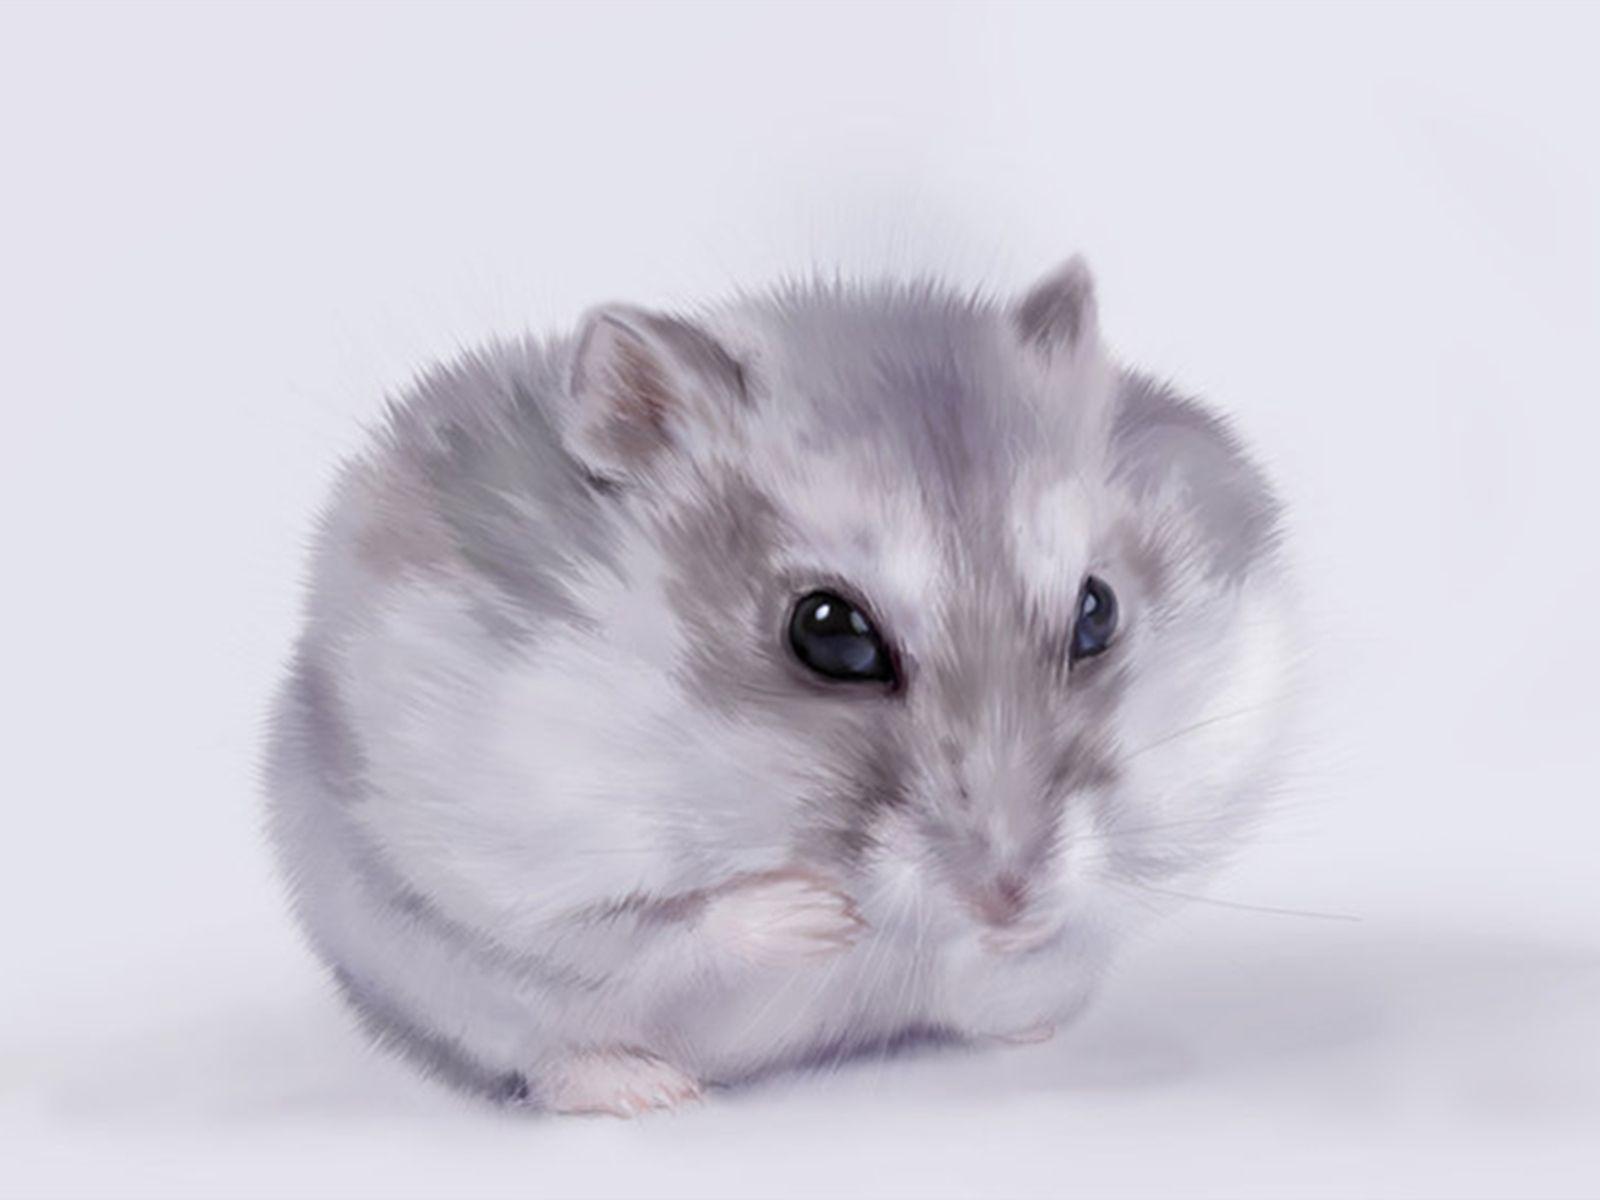 These Are The Cute Hamster Wallpaper Other Wallpaper Picture